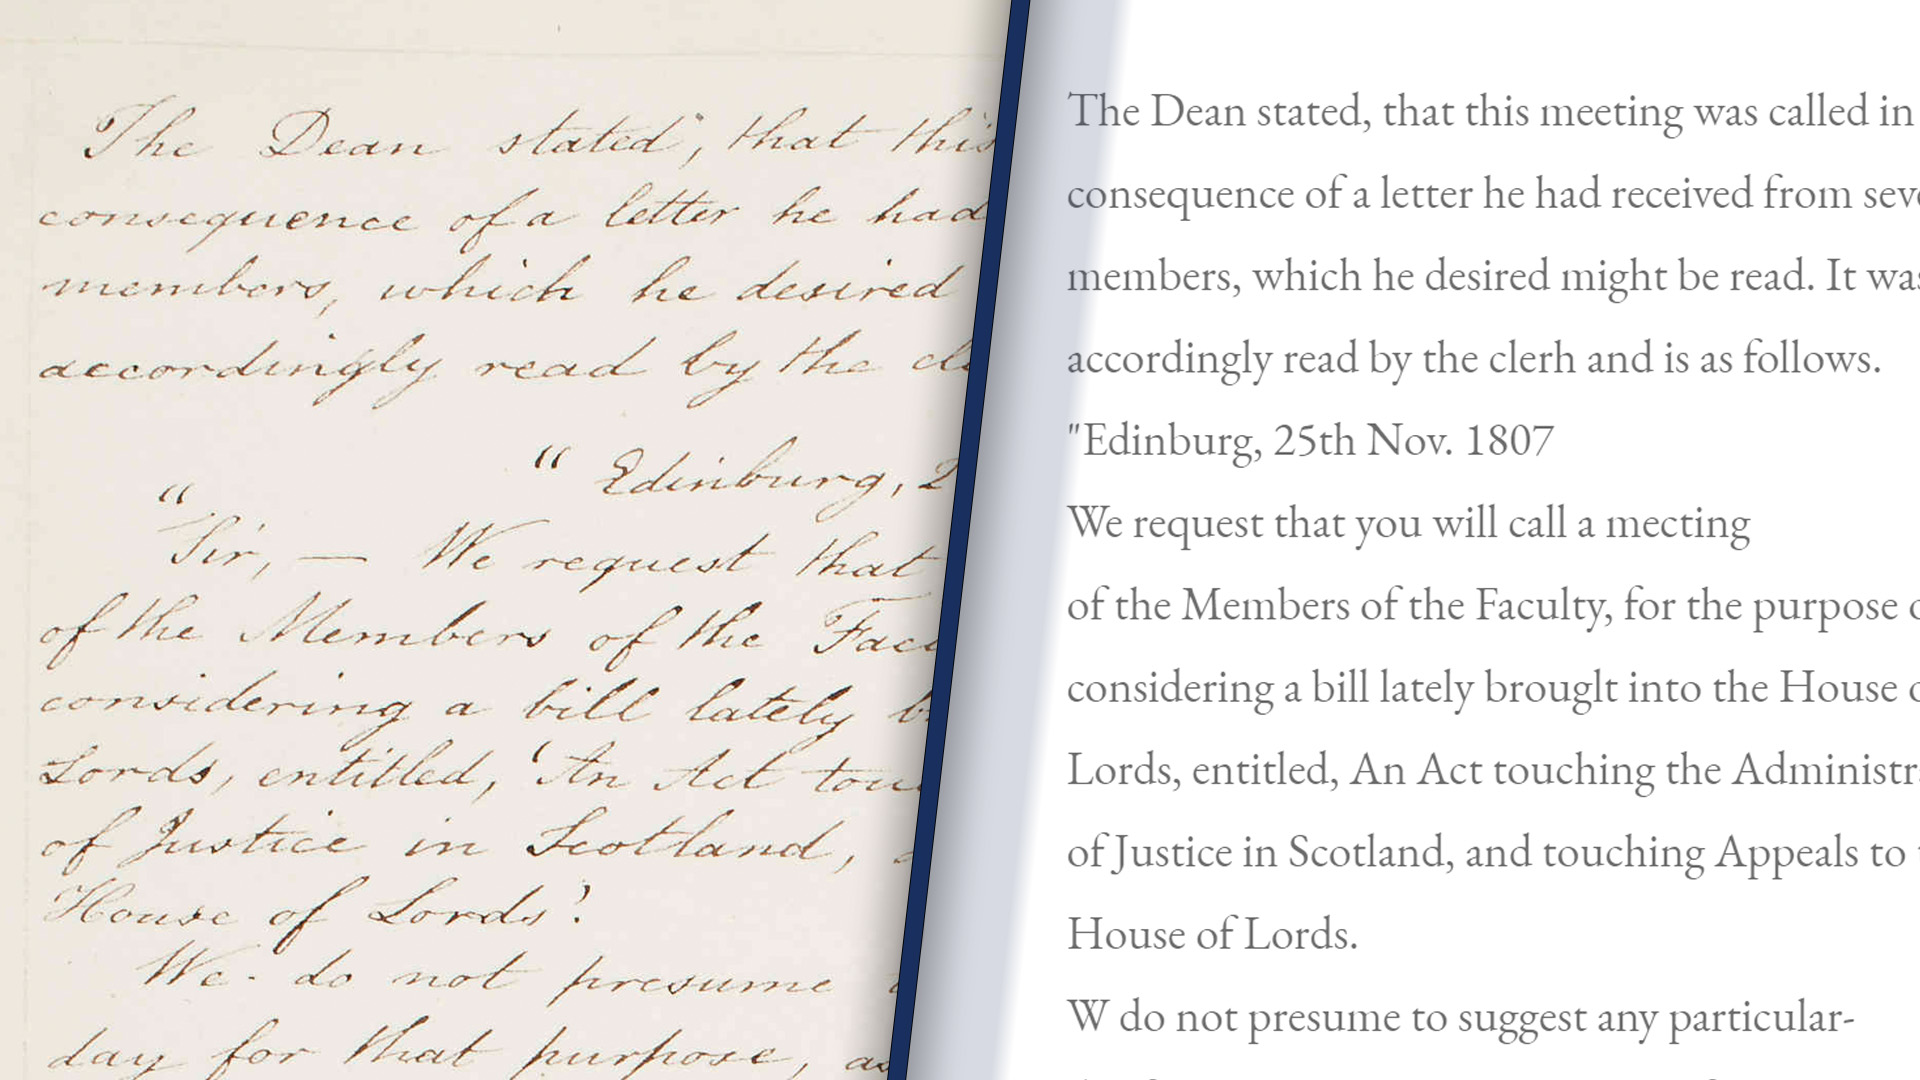 How to read cursive handwriting in historical documents - READ-COOP